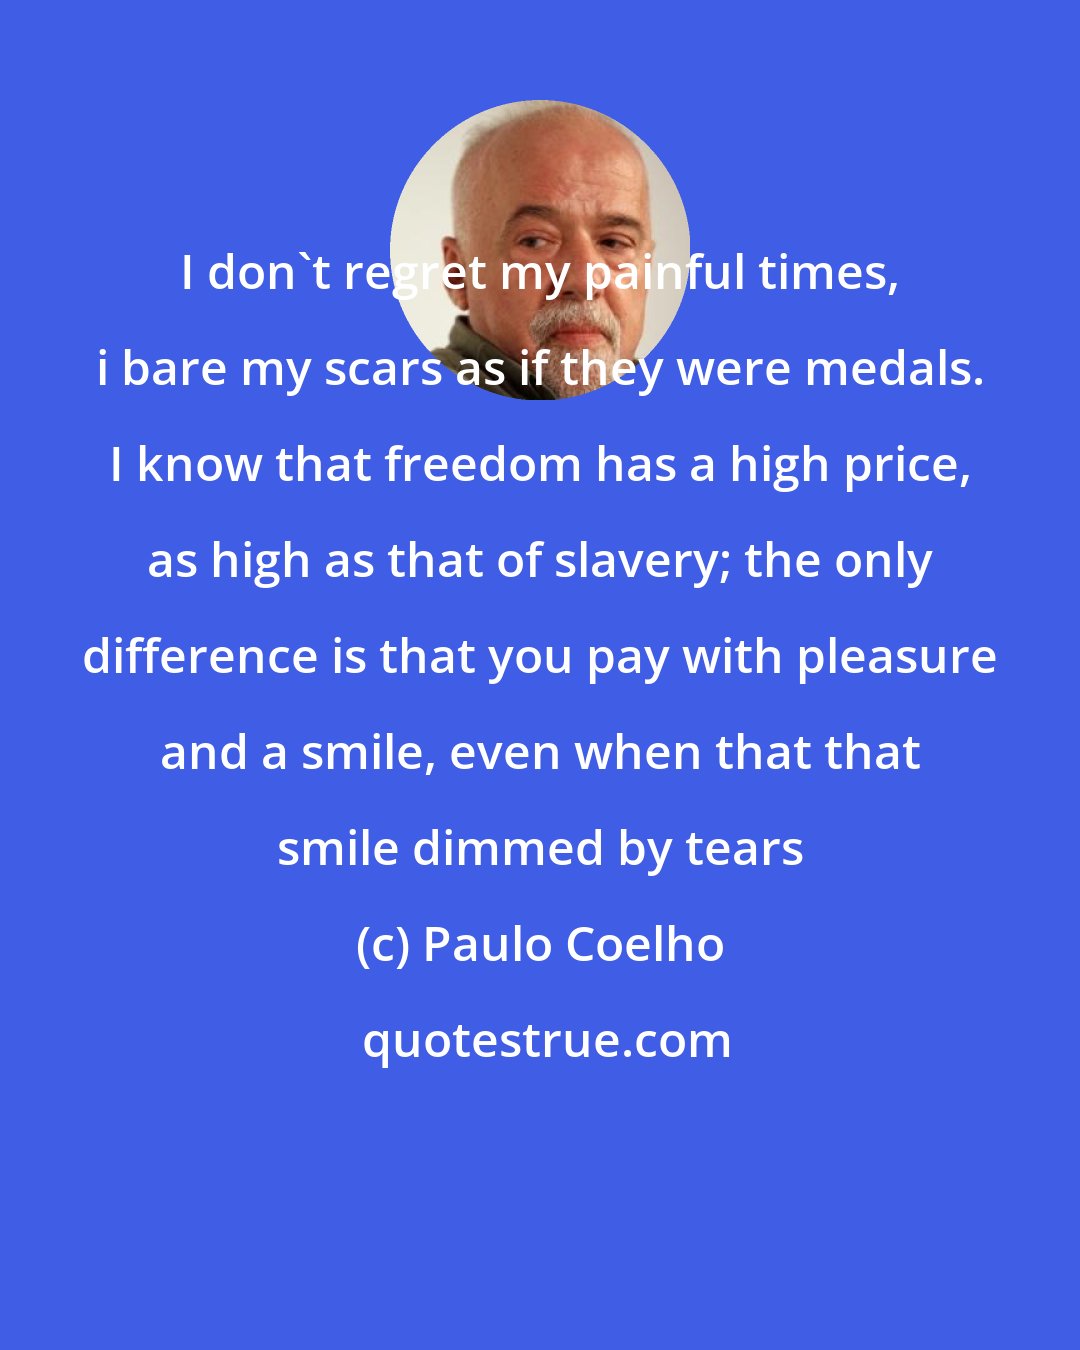 Paulo Coelho: I don't regret my painful times, i bare my scars as if they were medals. I know that freedom has a high price, as high as that of slavery; the only difference is that you pay with pleasure and a smile, even when that that smile dimmed by tears